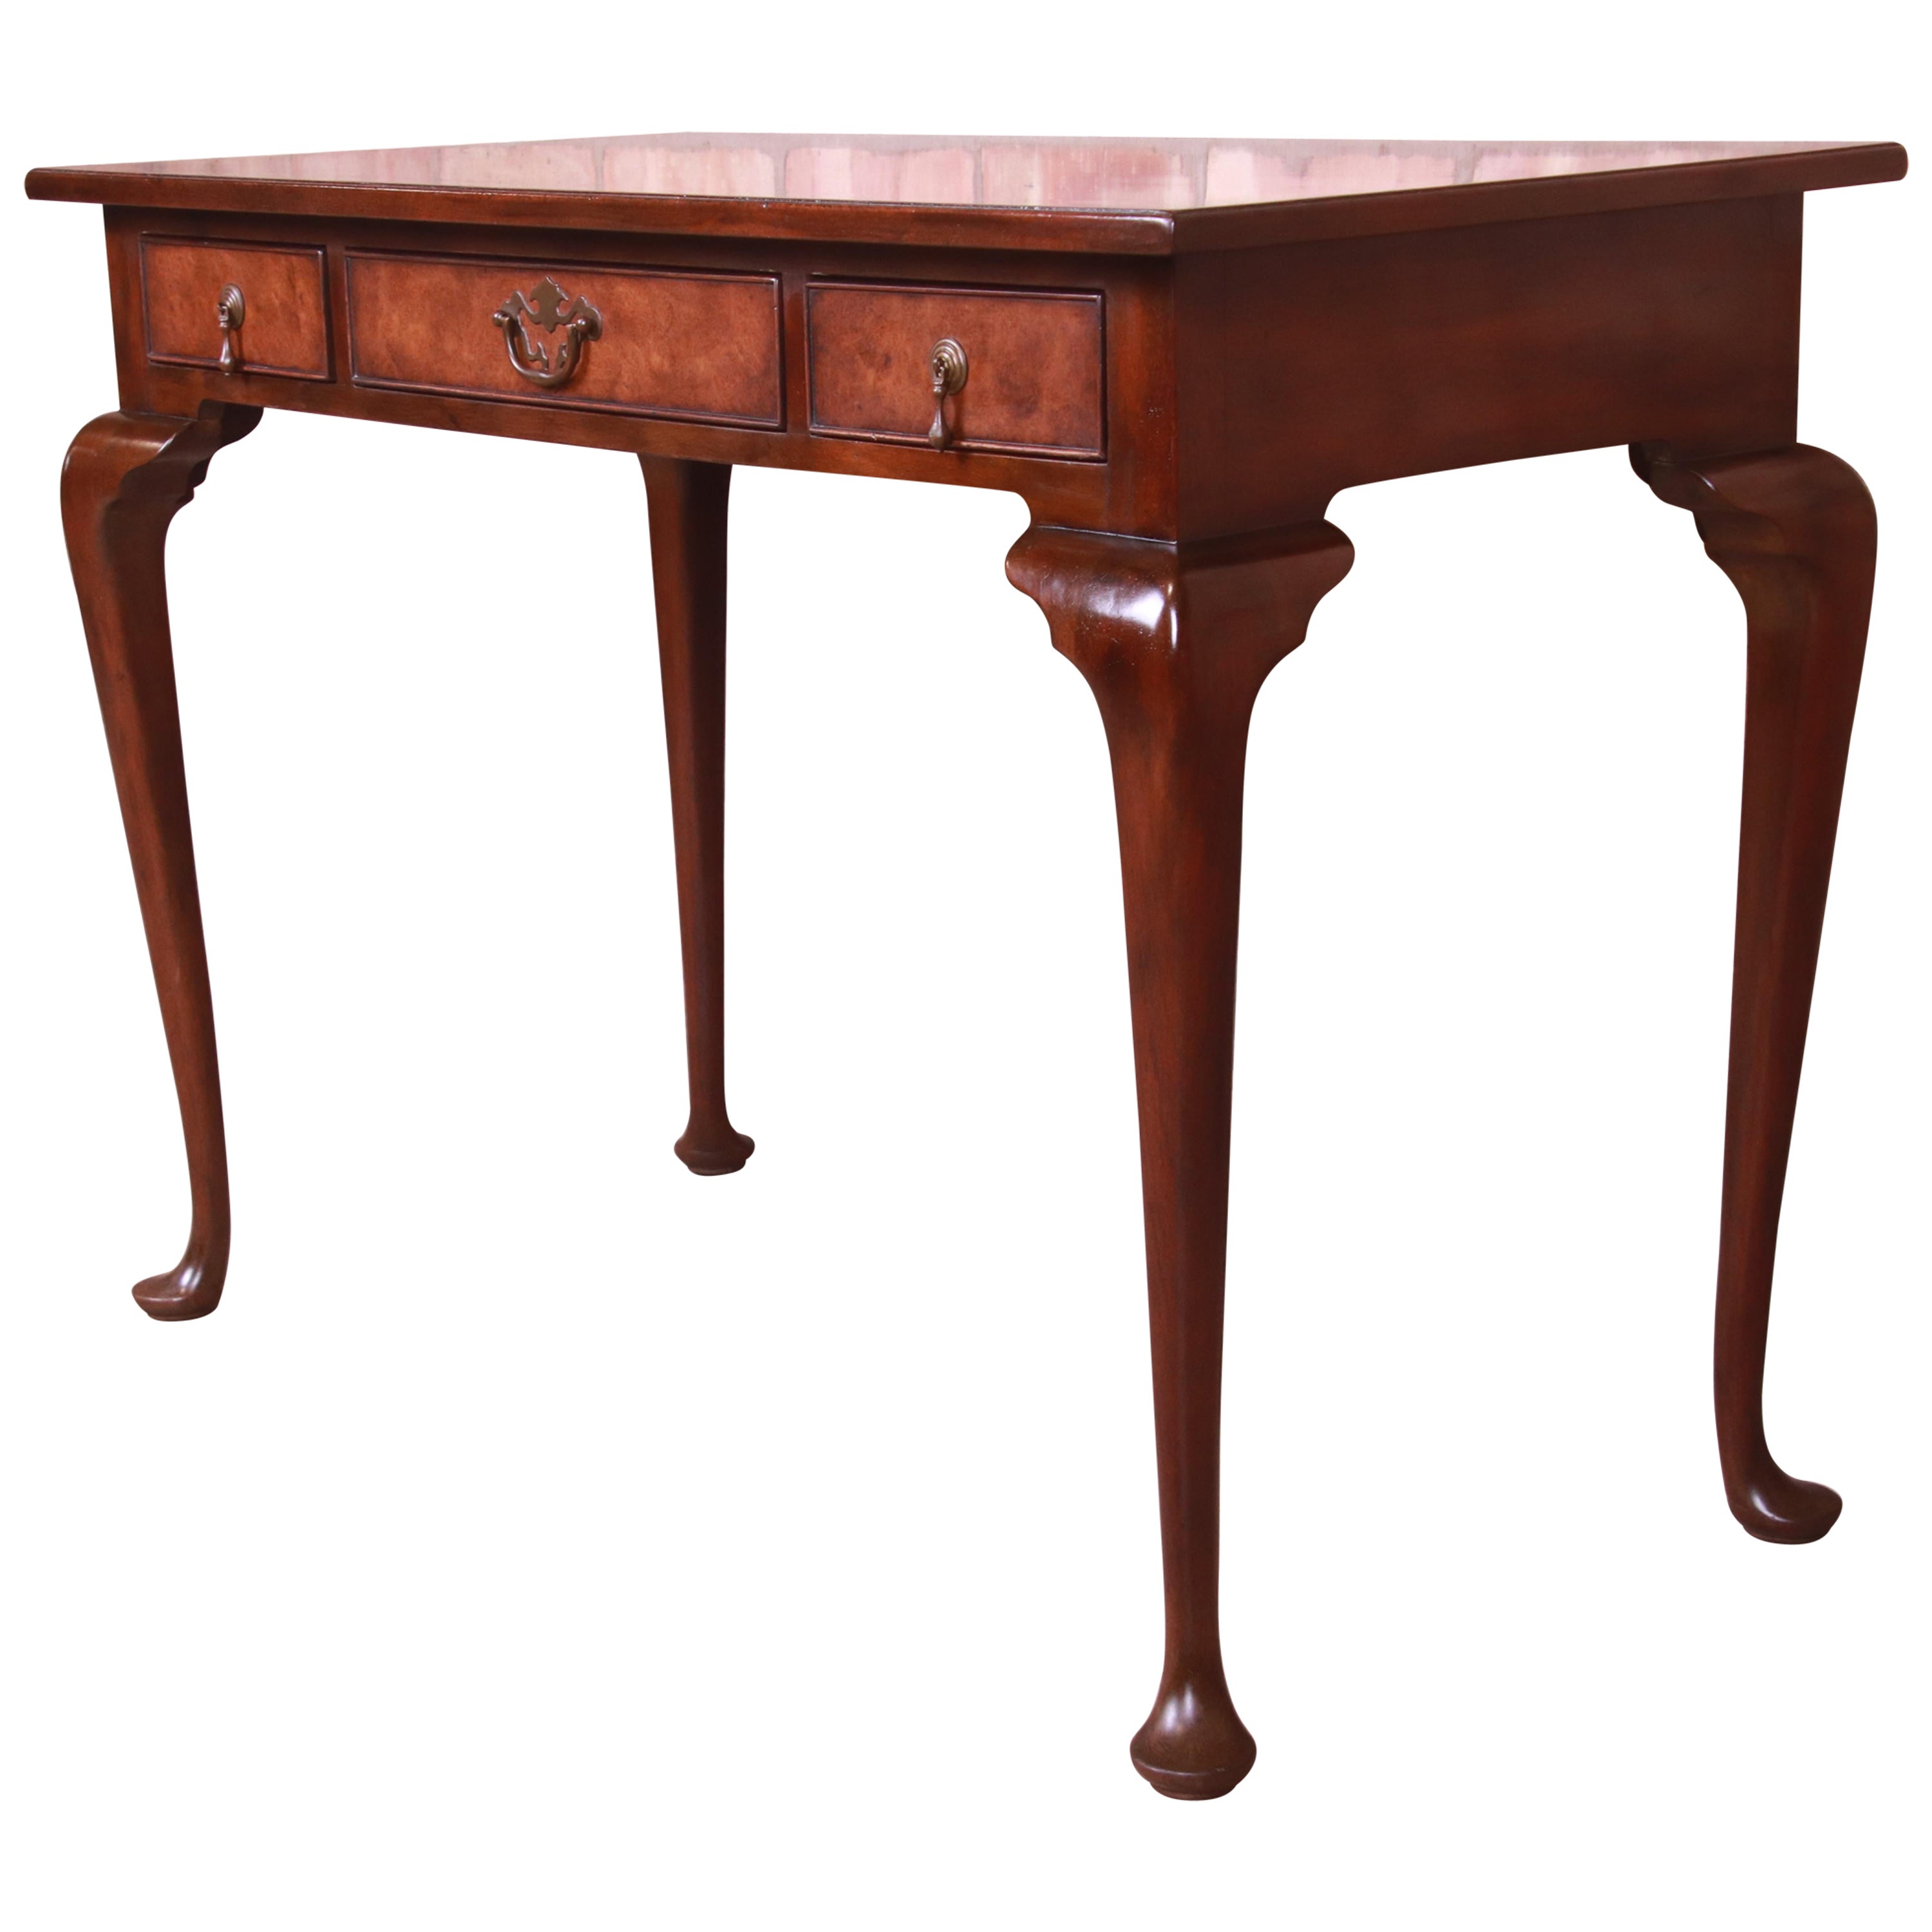 Kittinger Queen Anne Burled Walnut Writing Desk or Console Table